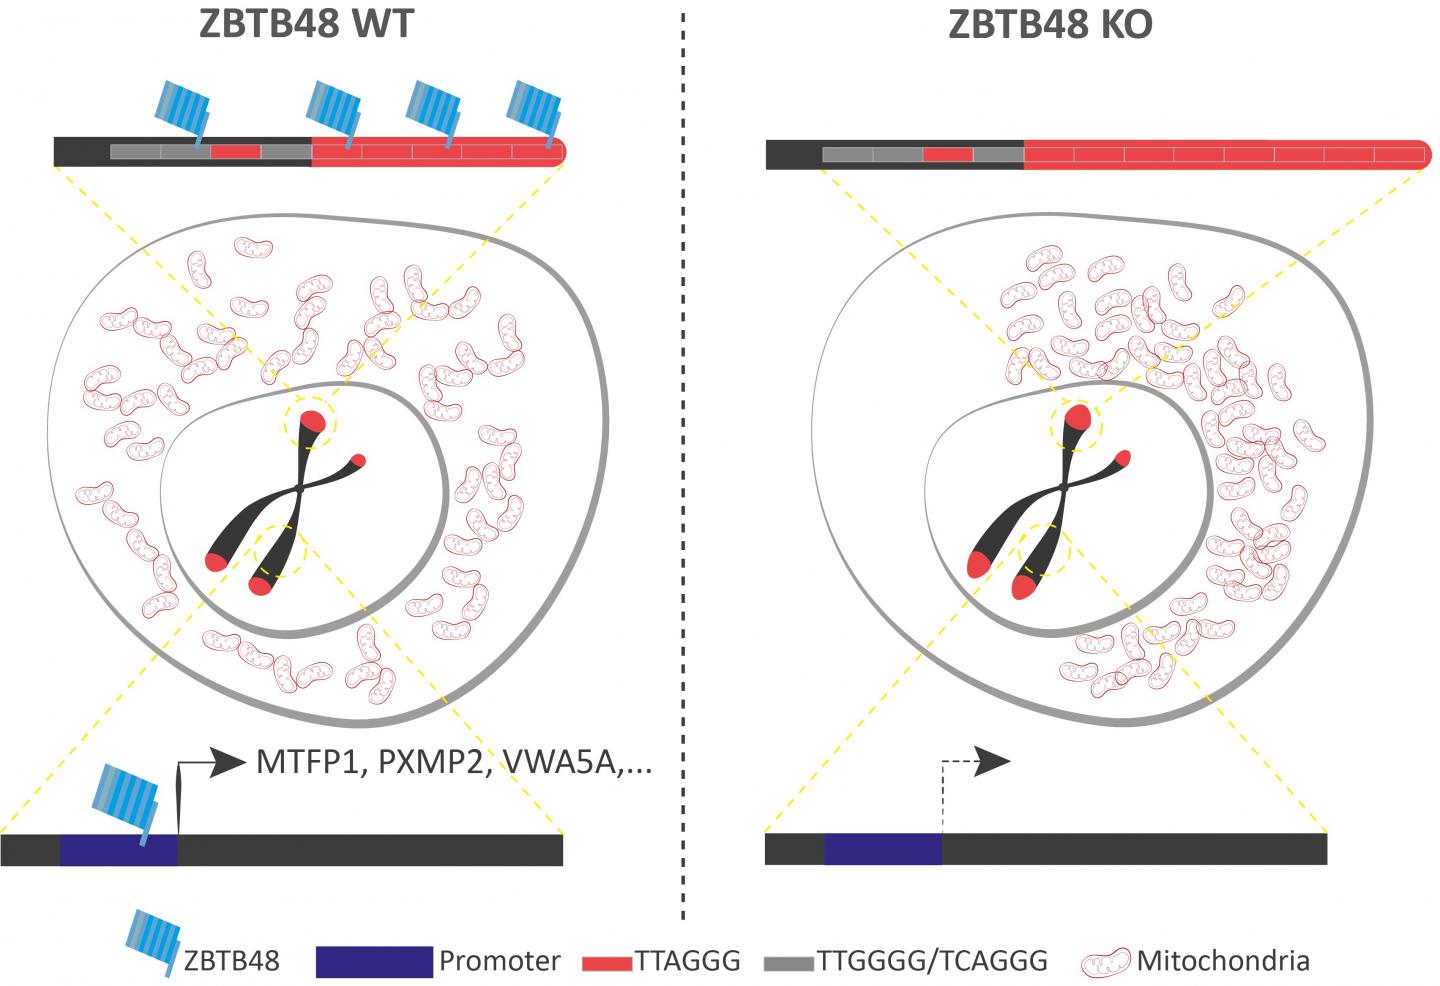 ZBTB48 is both a Telomere-binding Protein Limiting Telomere Length and a Transcriptional Activator